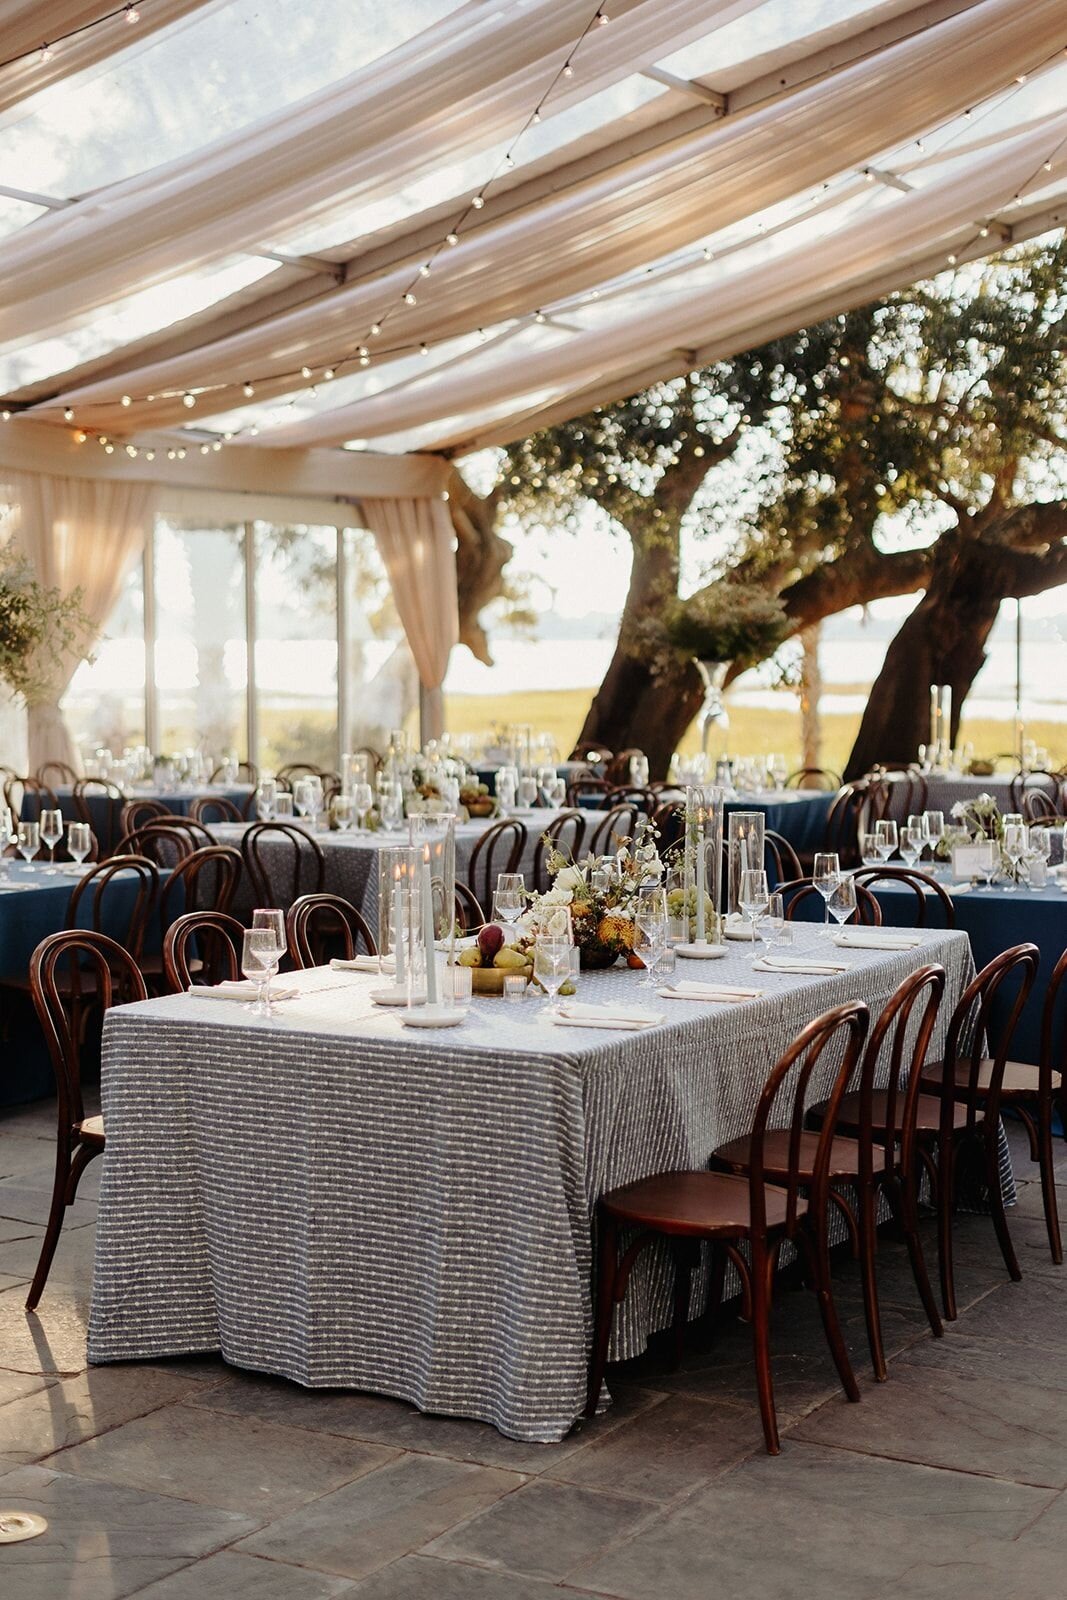 Here comes the sunset... 🌅
.
.
.
#goldenhour #weddingreception #weddingdesign #weddingdecor #wedding #seateddinner #tablescape #bluewedding #nudewedding #champagnewedding #ceilingswag #ceilingtreatment #cleartoptent #champagnefabric #nudefabric #neu